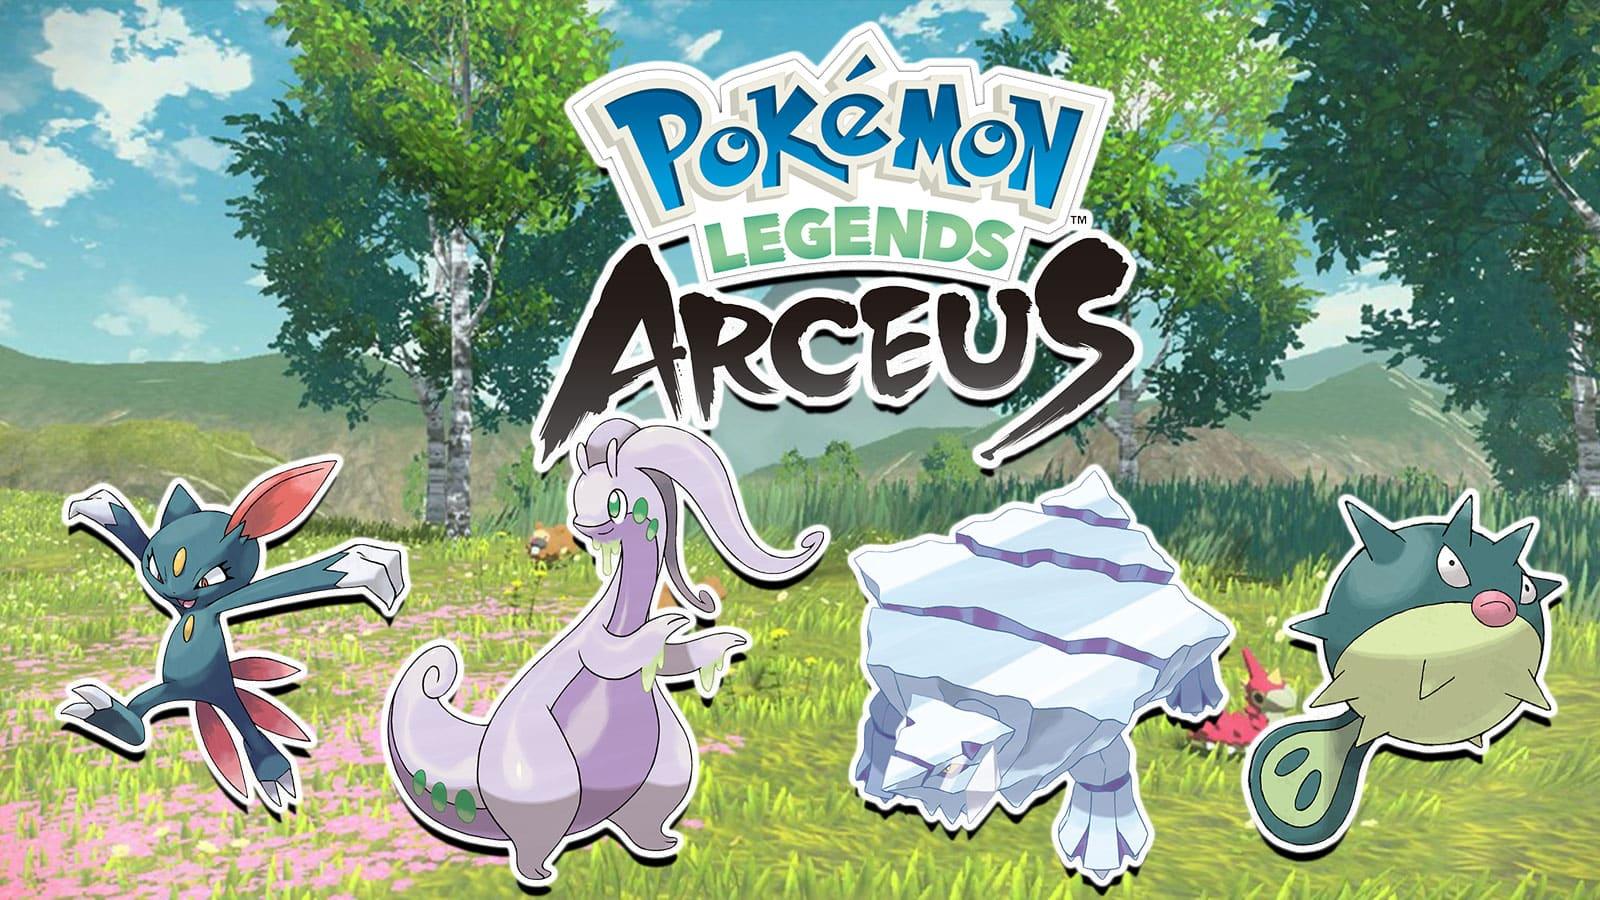 Pokemon Legends Arceus Voltorb was predicted 11 years ago by an